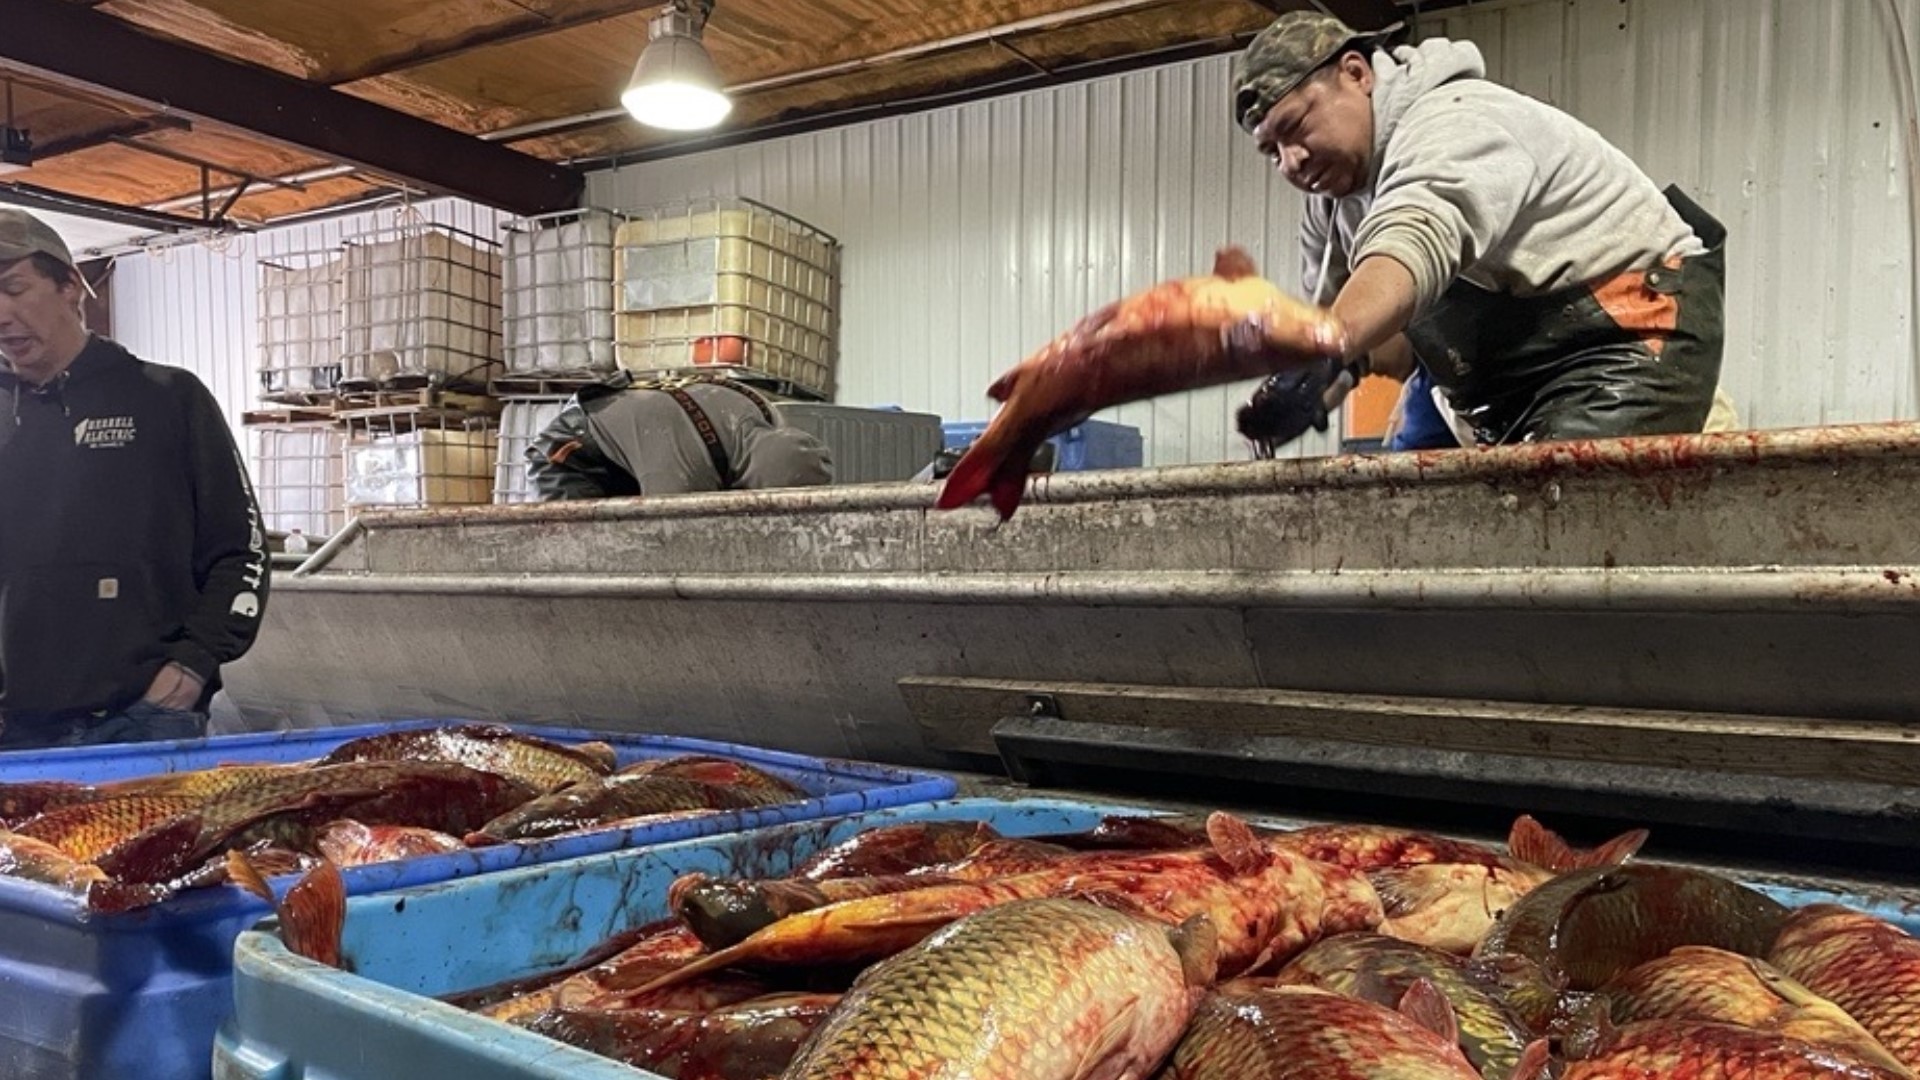 Every December, Schafer Fisheries processes 300,000 pounds of 'Christmas Carp,' which is sold to Polish households across the world.